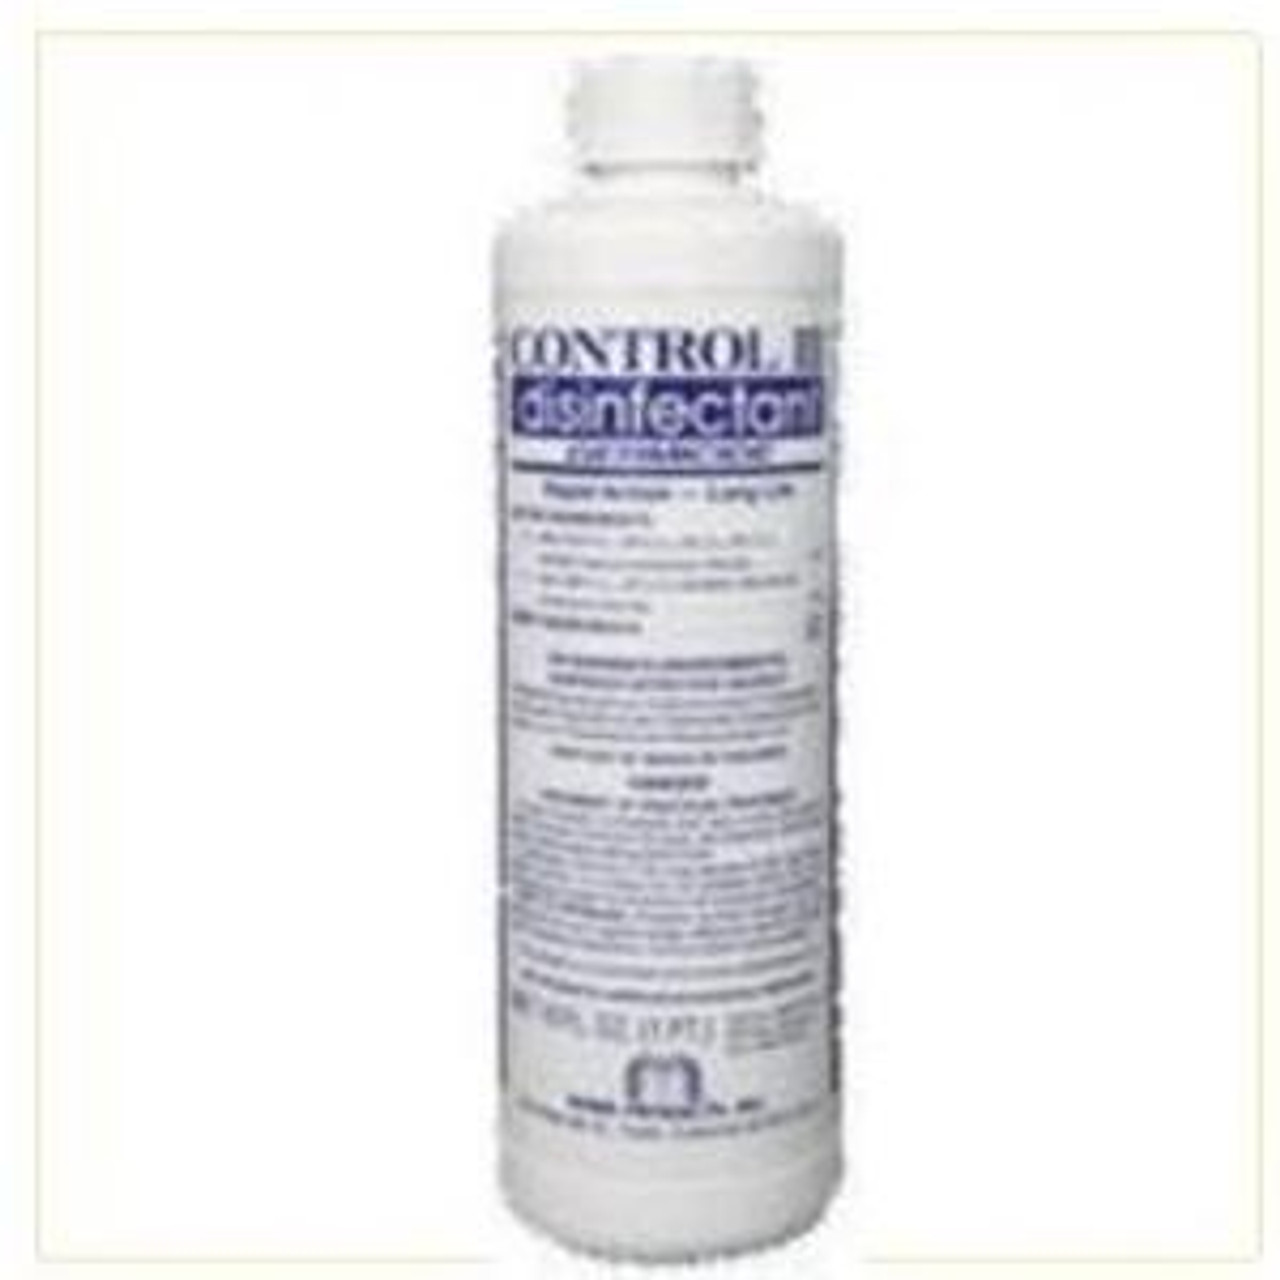 Control III Disinfectant Germicide Concentration 8oz